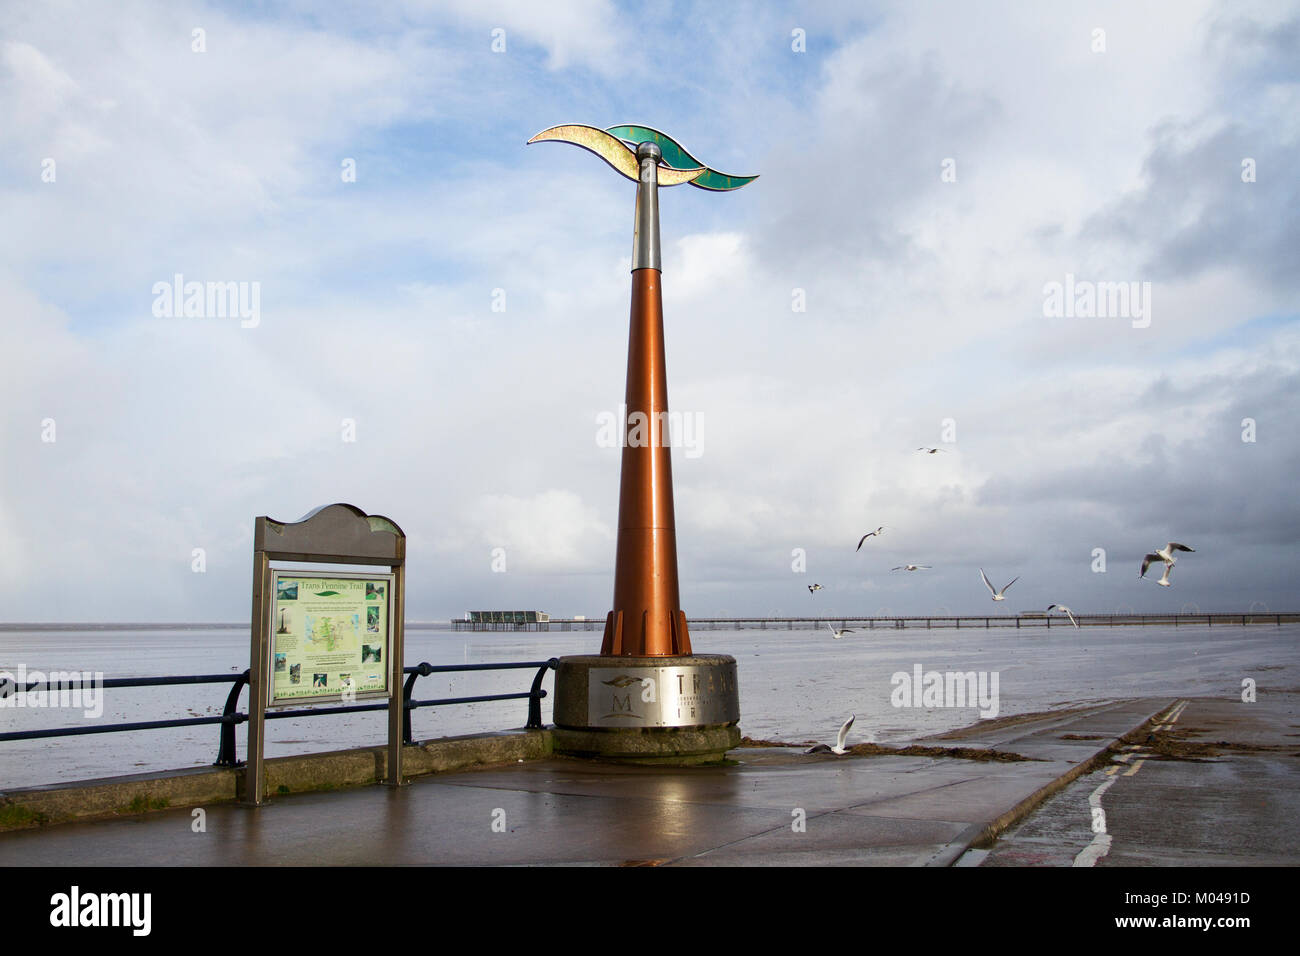 Southport,, Merseyside. 19th Jan, 2018. UK Weather. Sunshine and wintery showers on the coast with the spinning weathervane catching a rare burst of sunshine.  This monolith is a marker for the Trans Pennine way cycleway along the coastal paths of the resort promenade. Credit: MediaWorldImages/Alamy Live News Stock Photo